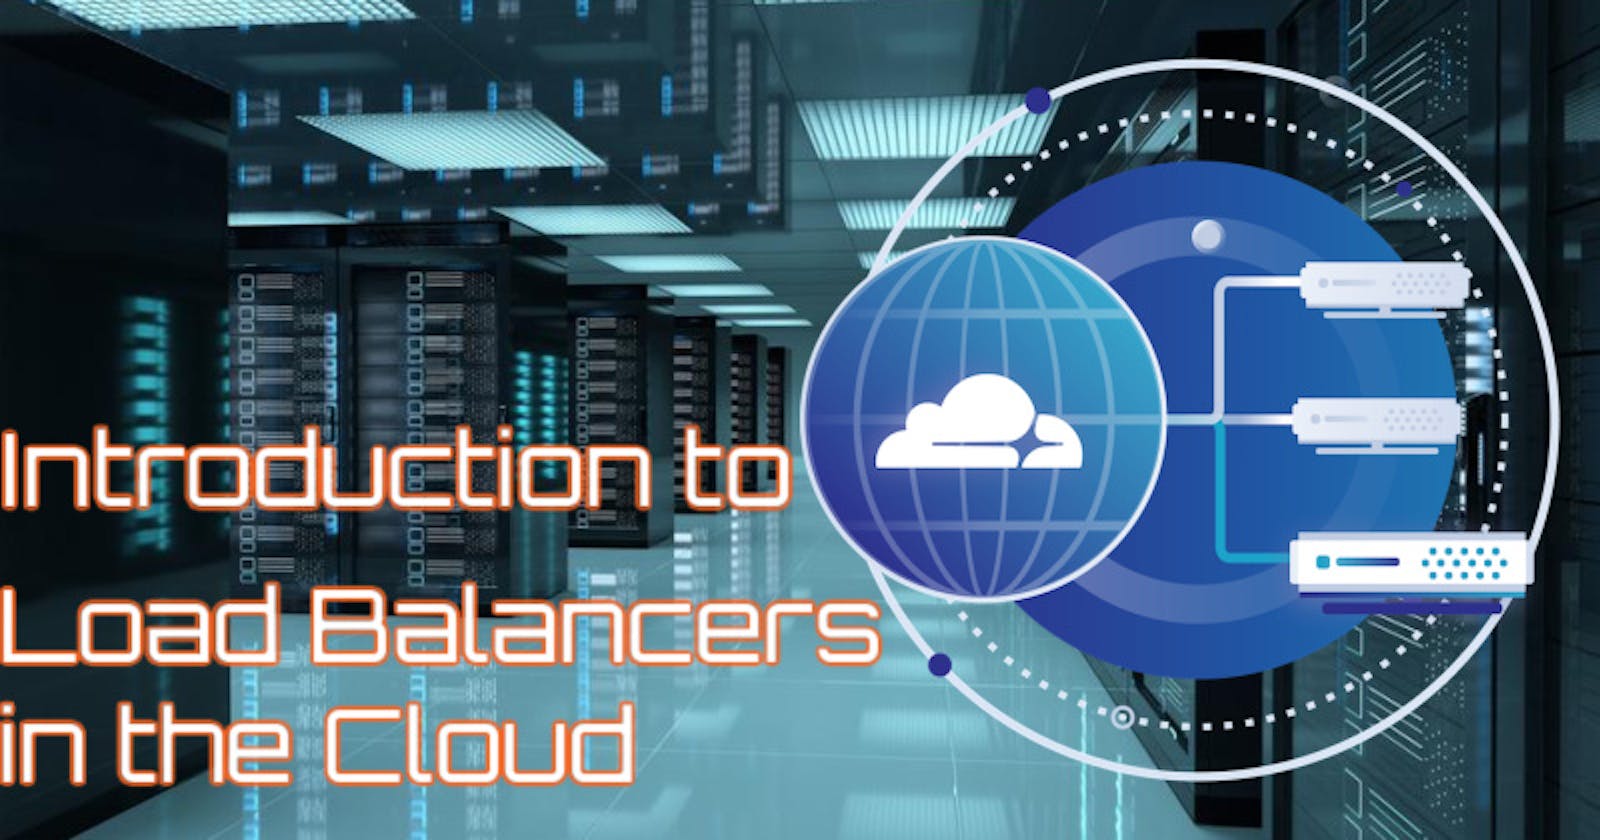 Introduction to Load Balancers in the Cloud